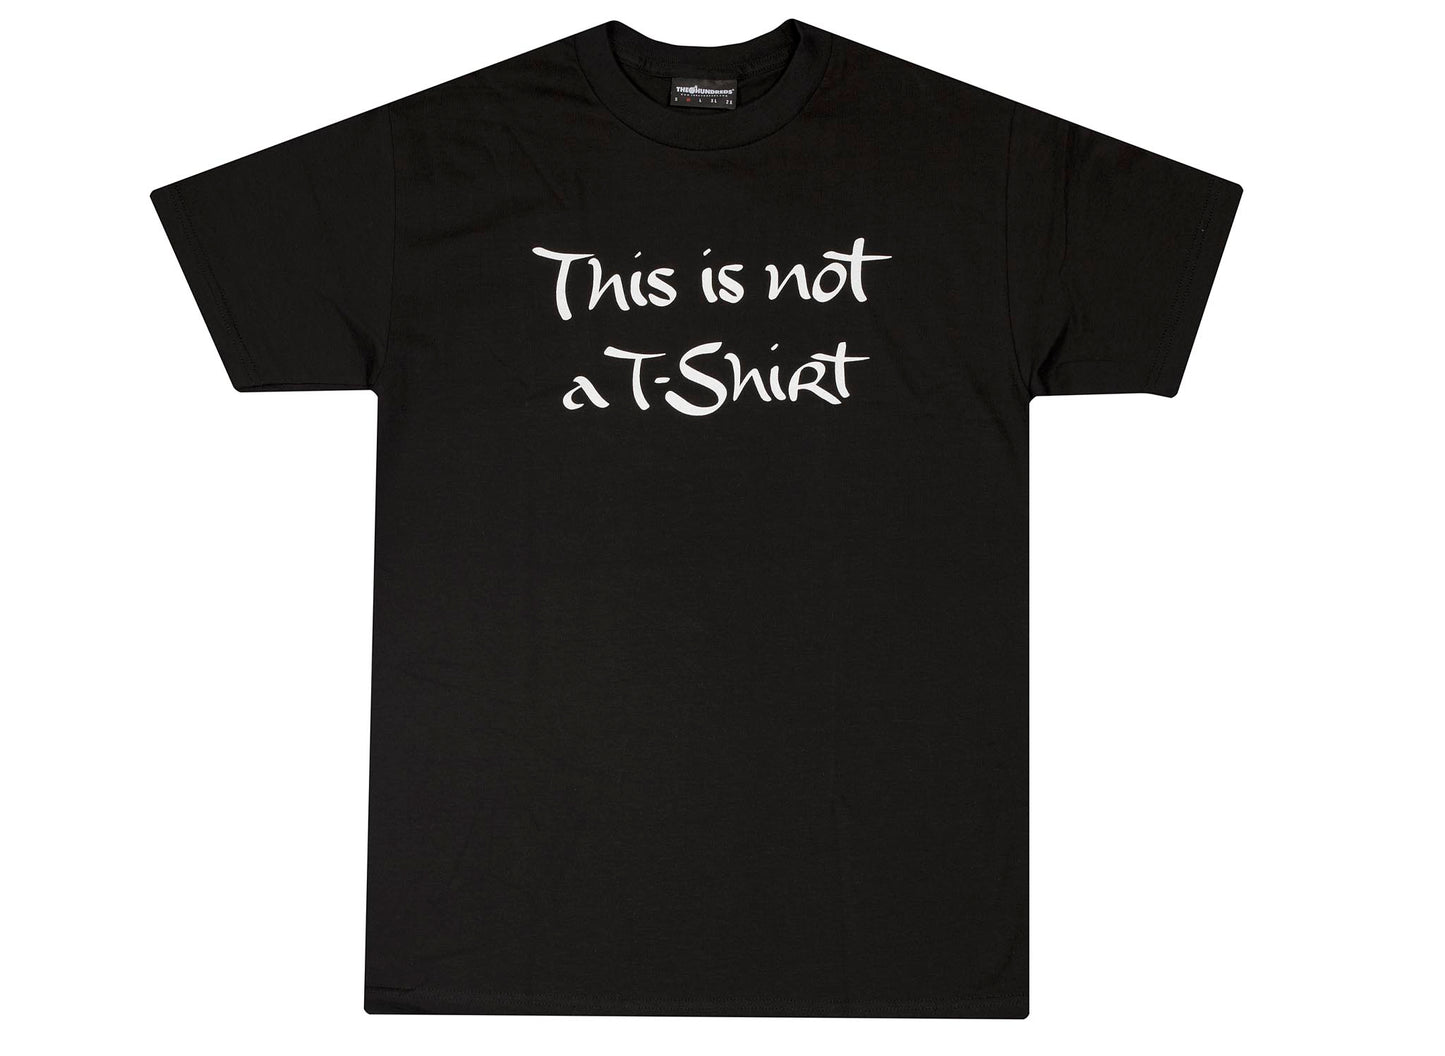 The Hundreds "This is not a T-Shirt" Tee 'Black'